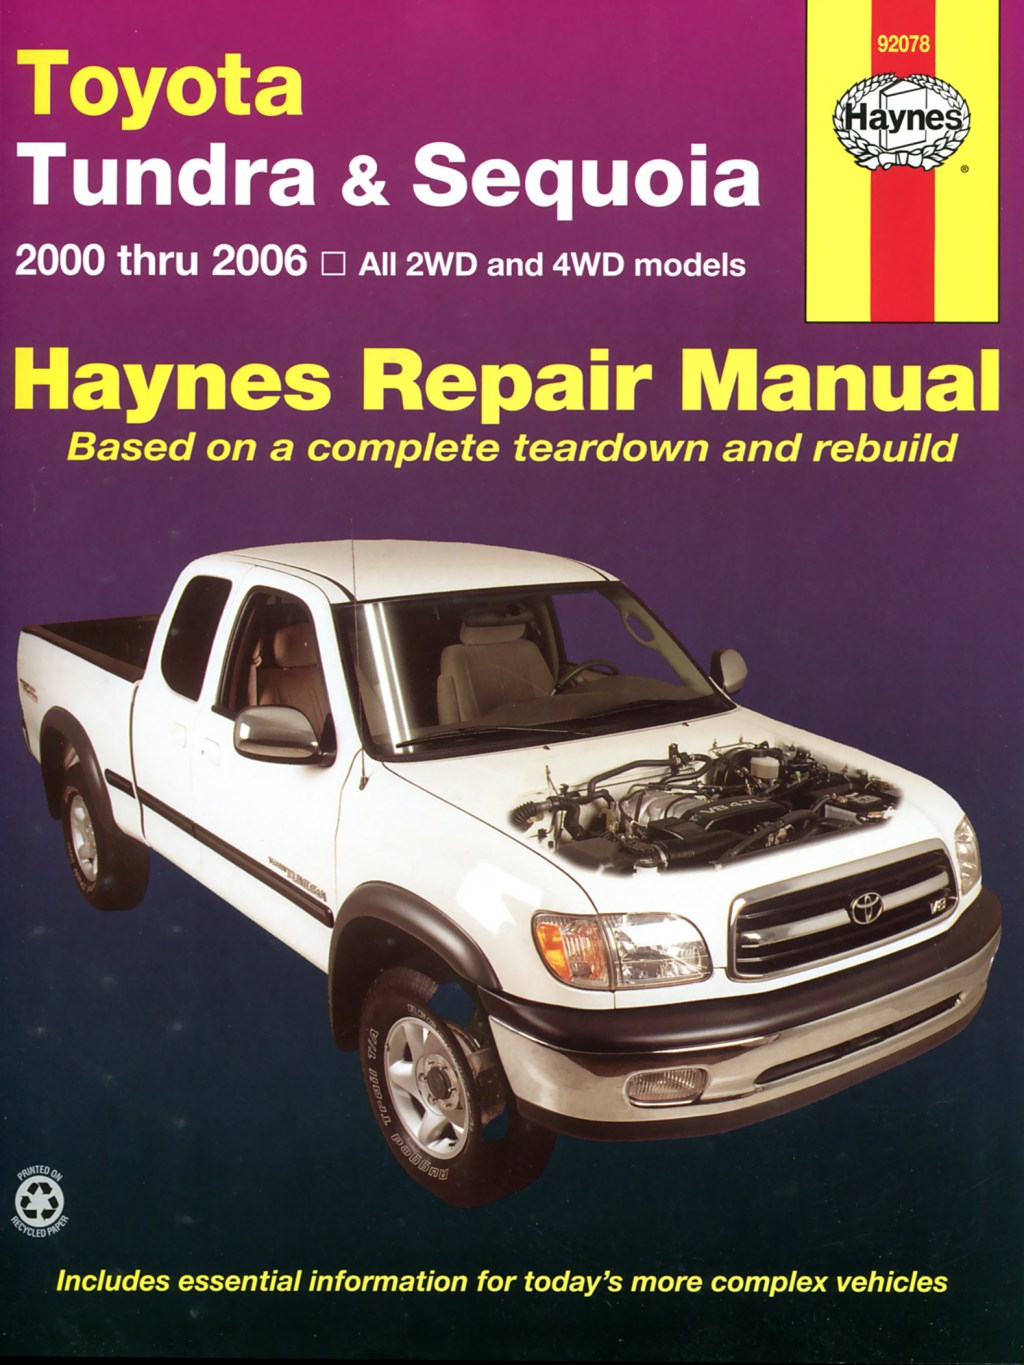 Picture of: Bundle: Toyota Tundra WD & WD (-) & Sequoia (-) Haynes Repair  Manual